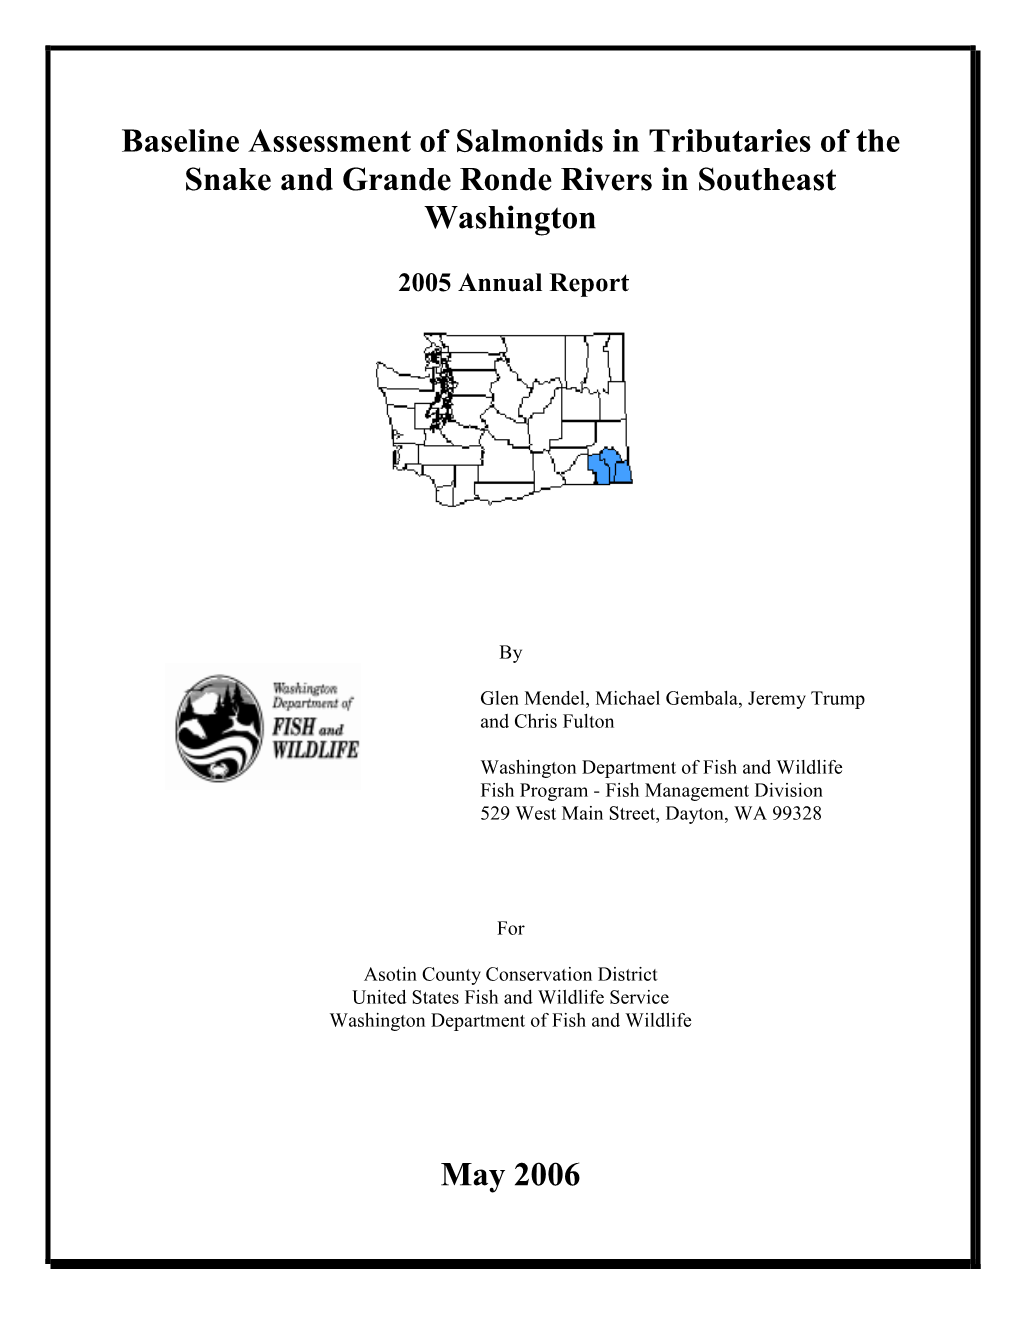 Baseline Assessment of Salmonids in Tributaries of the Snake and Grande Ronde Rivers in Southeast Washington